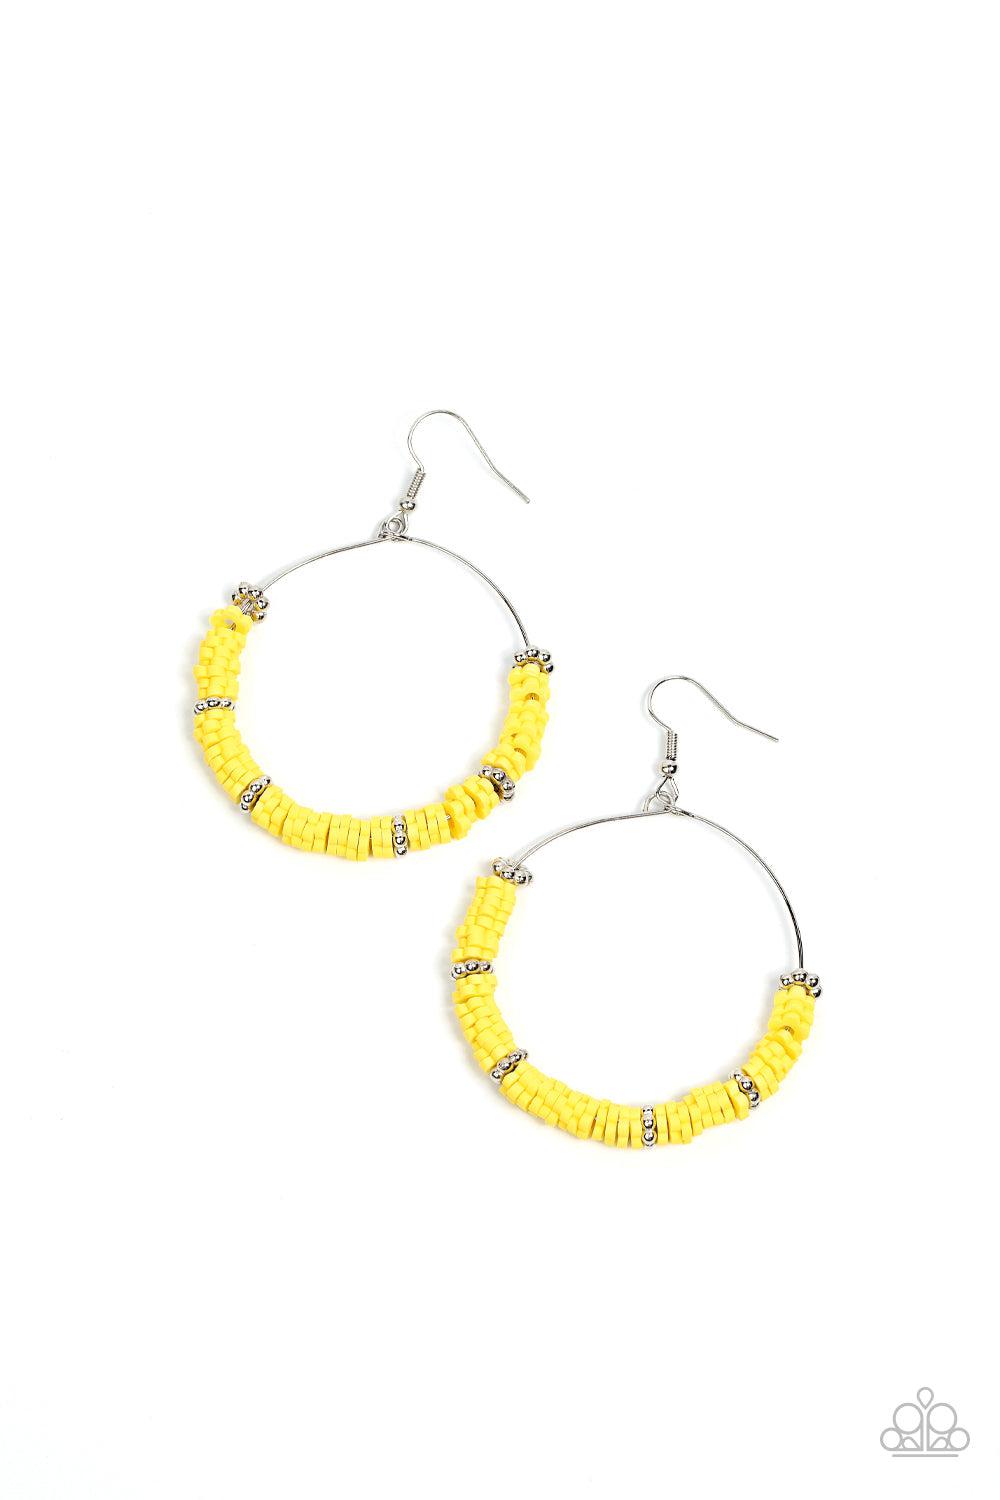 Loudly Layered Yellow Earrings - Paparazzi Accessories- lightbox - CarasShop.com - $5 Jewelry by Cara Jewels